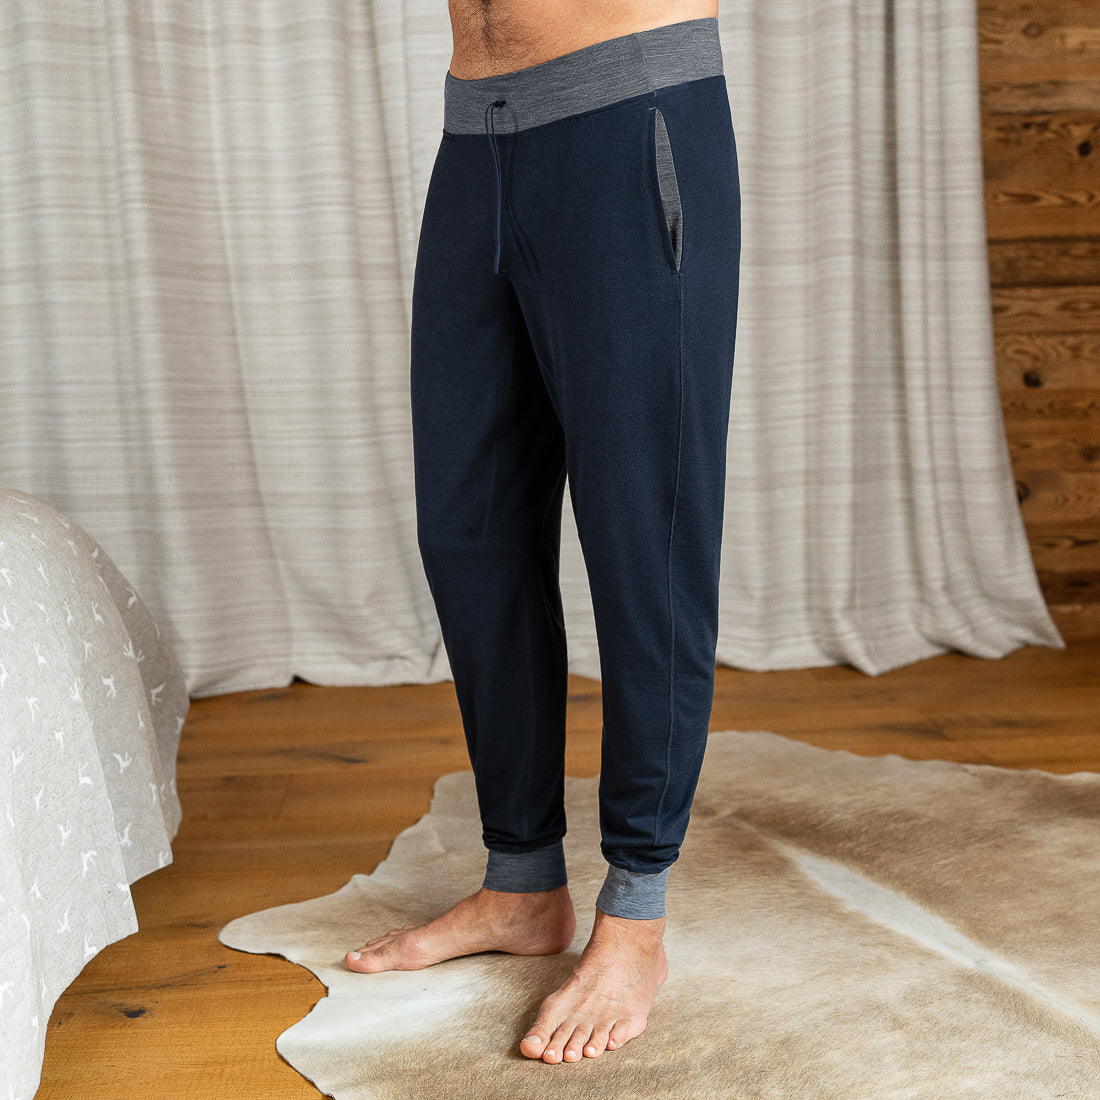 Wool Pajamas Have Cooling Benefits for Night Sweats